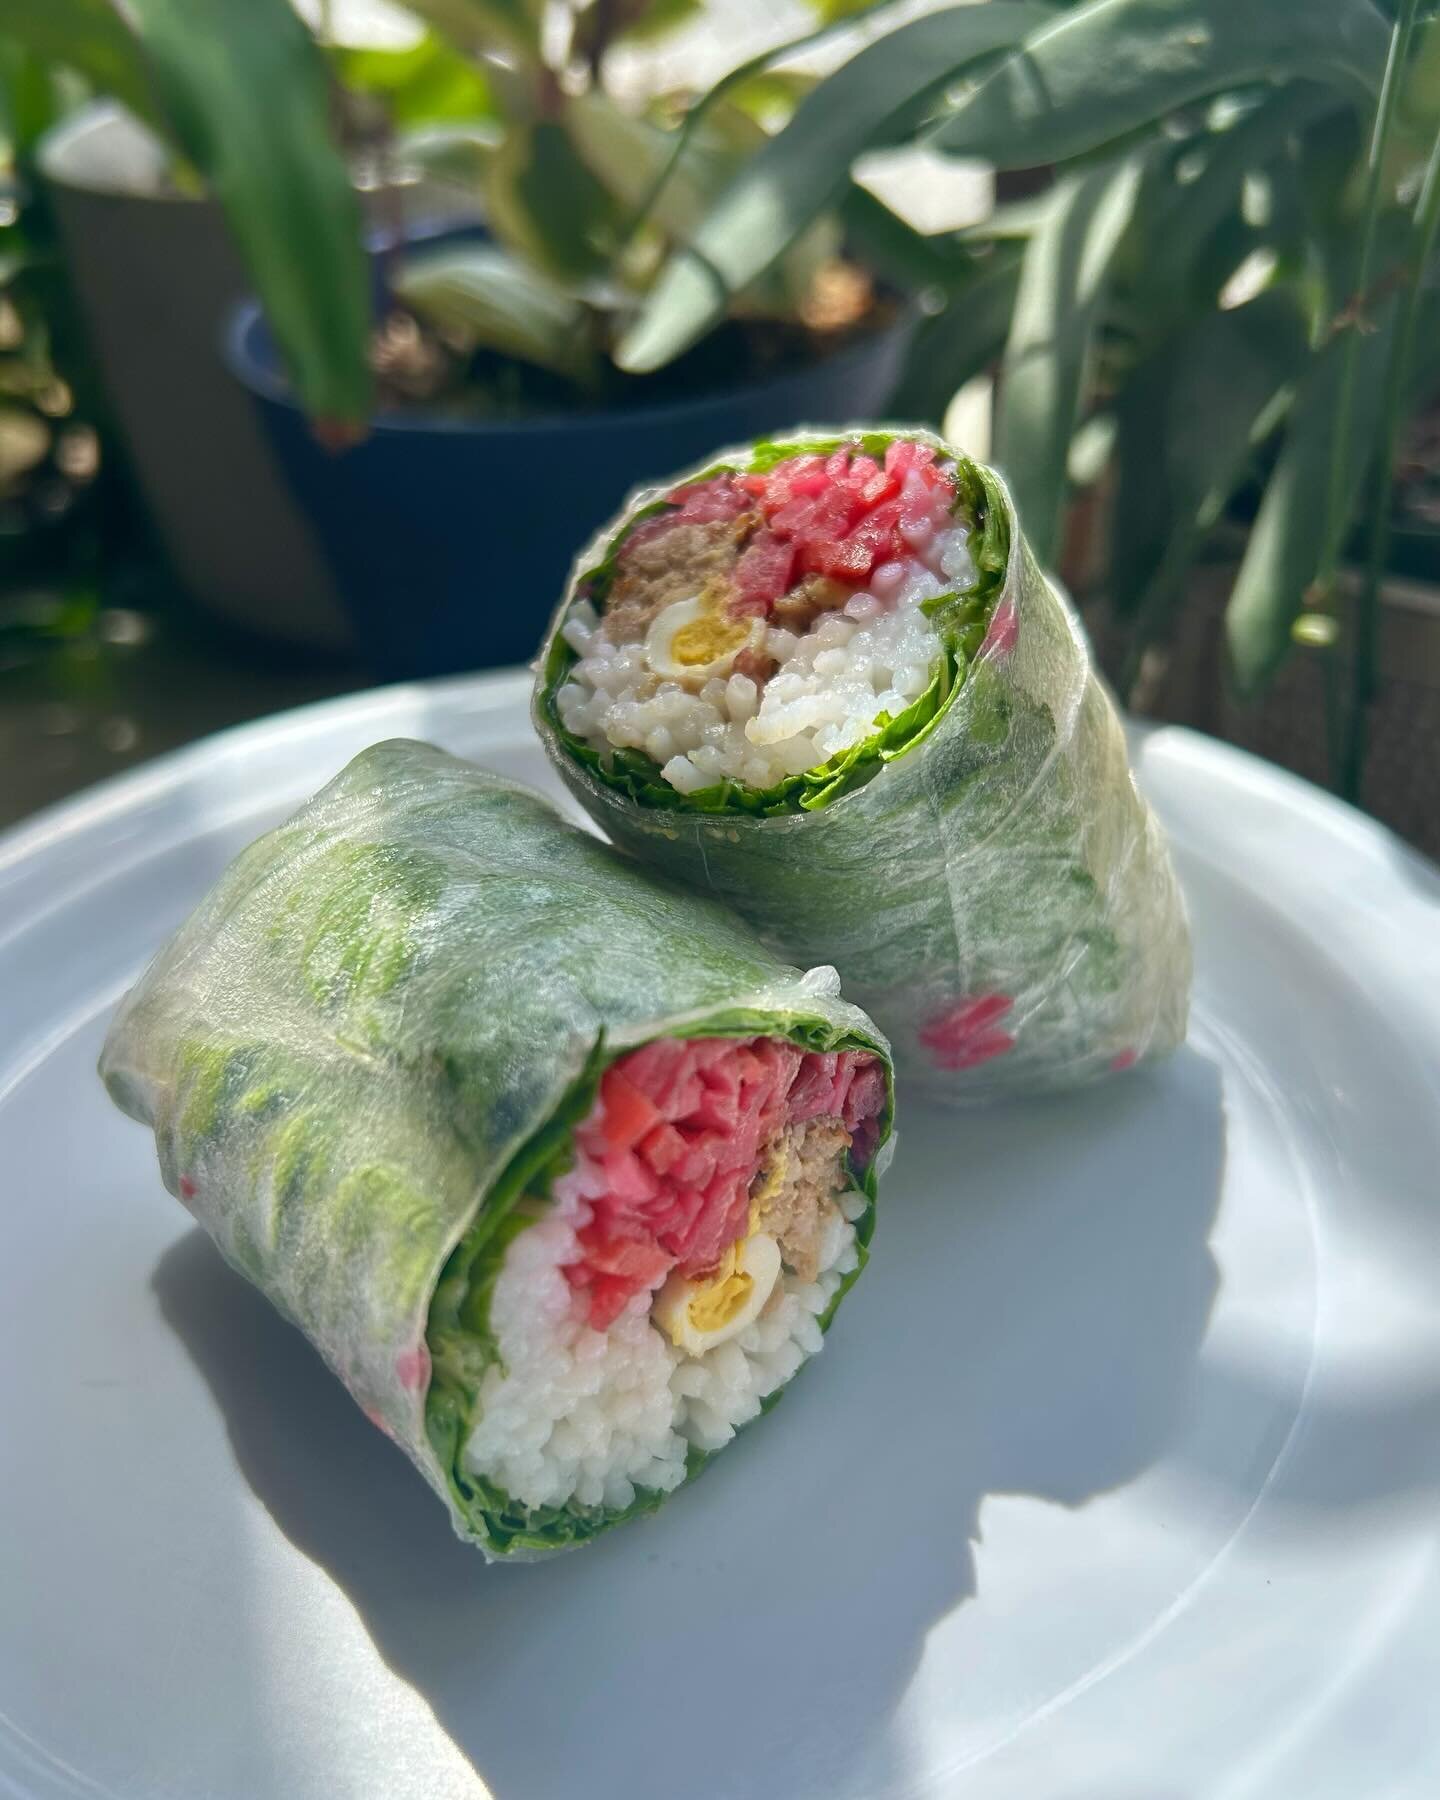 with the tiny quail egg in the middle are you freakin kidding me?? literally S.L.A.Y.! (Summer roll Lewk Are Yum) 

#summerolls #vietnamesefood #quaileggs